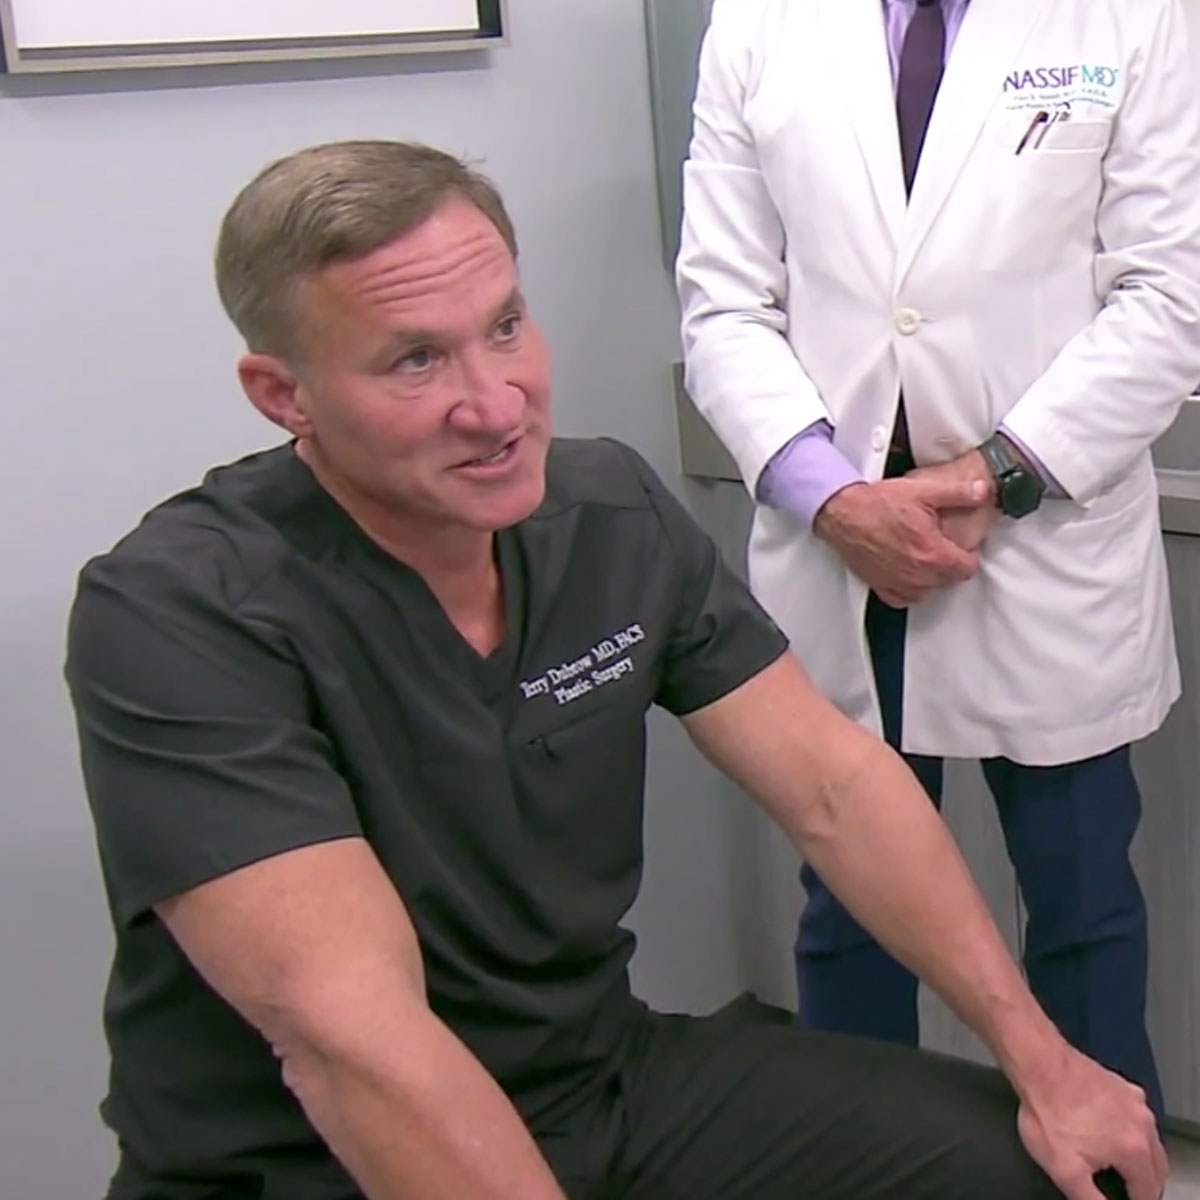 Size Matters with Breast Implants - Dr. Terry Dubrow